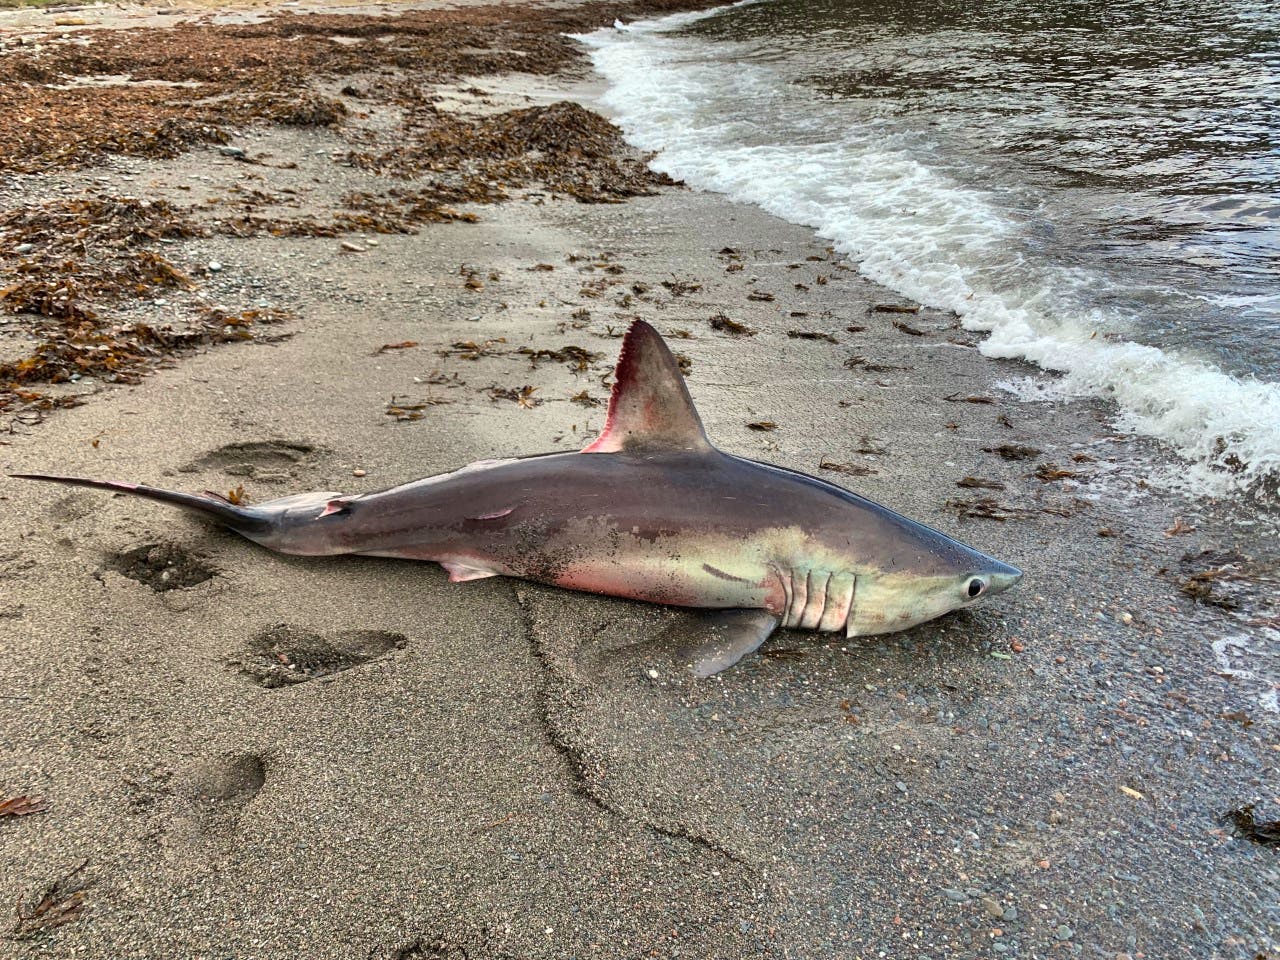 Watch: Man guides stranded shark back to ocean 